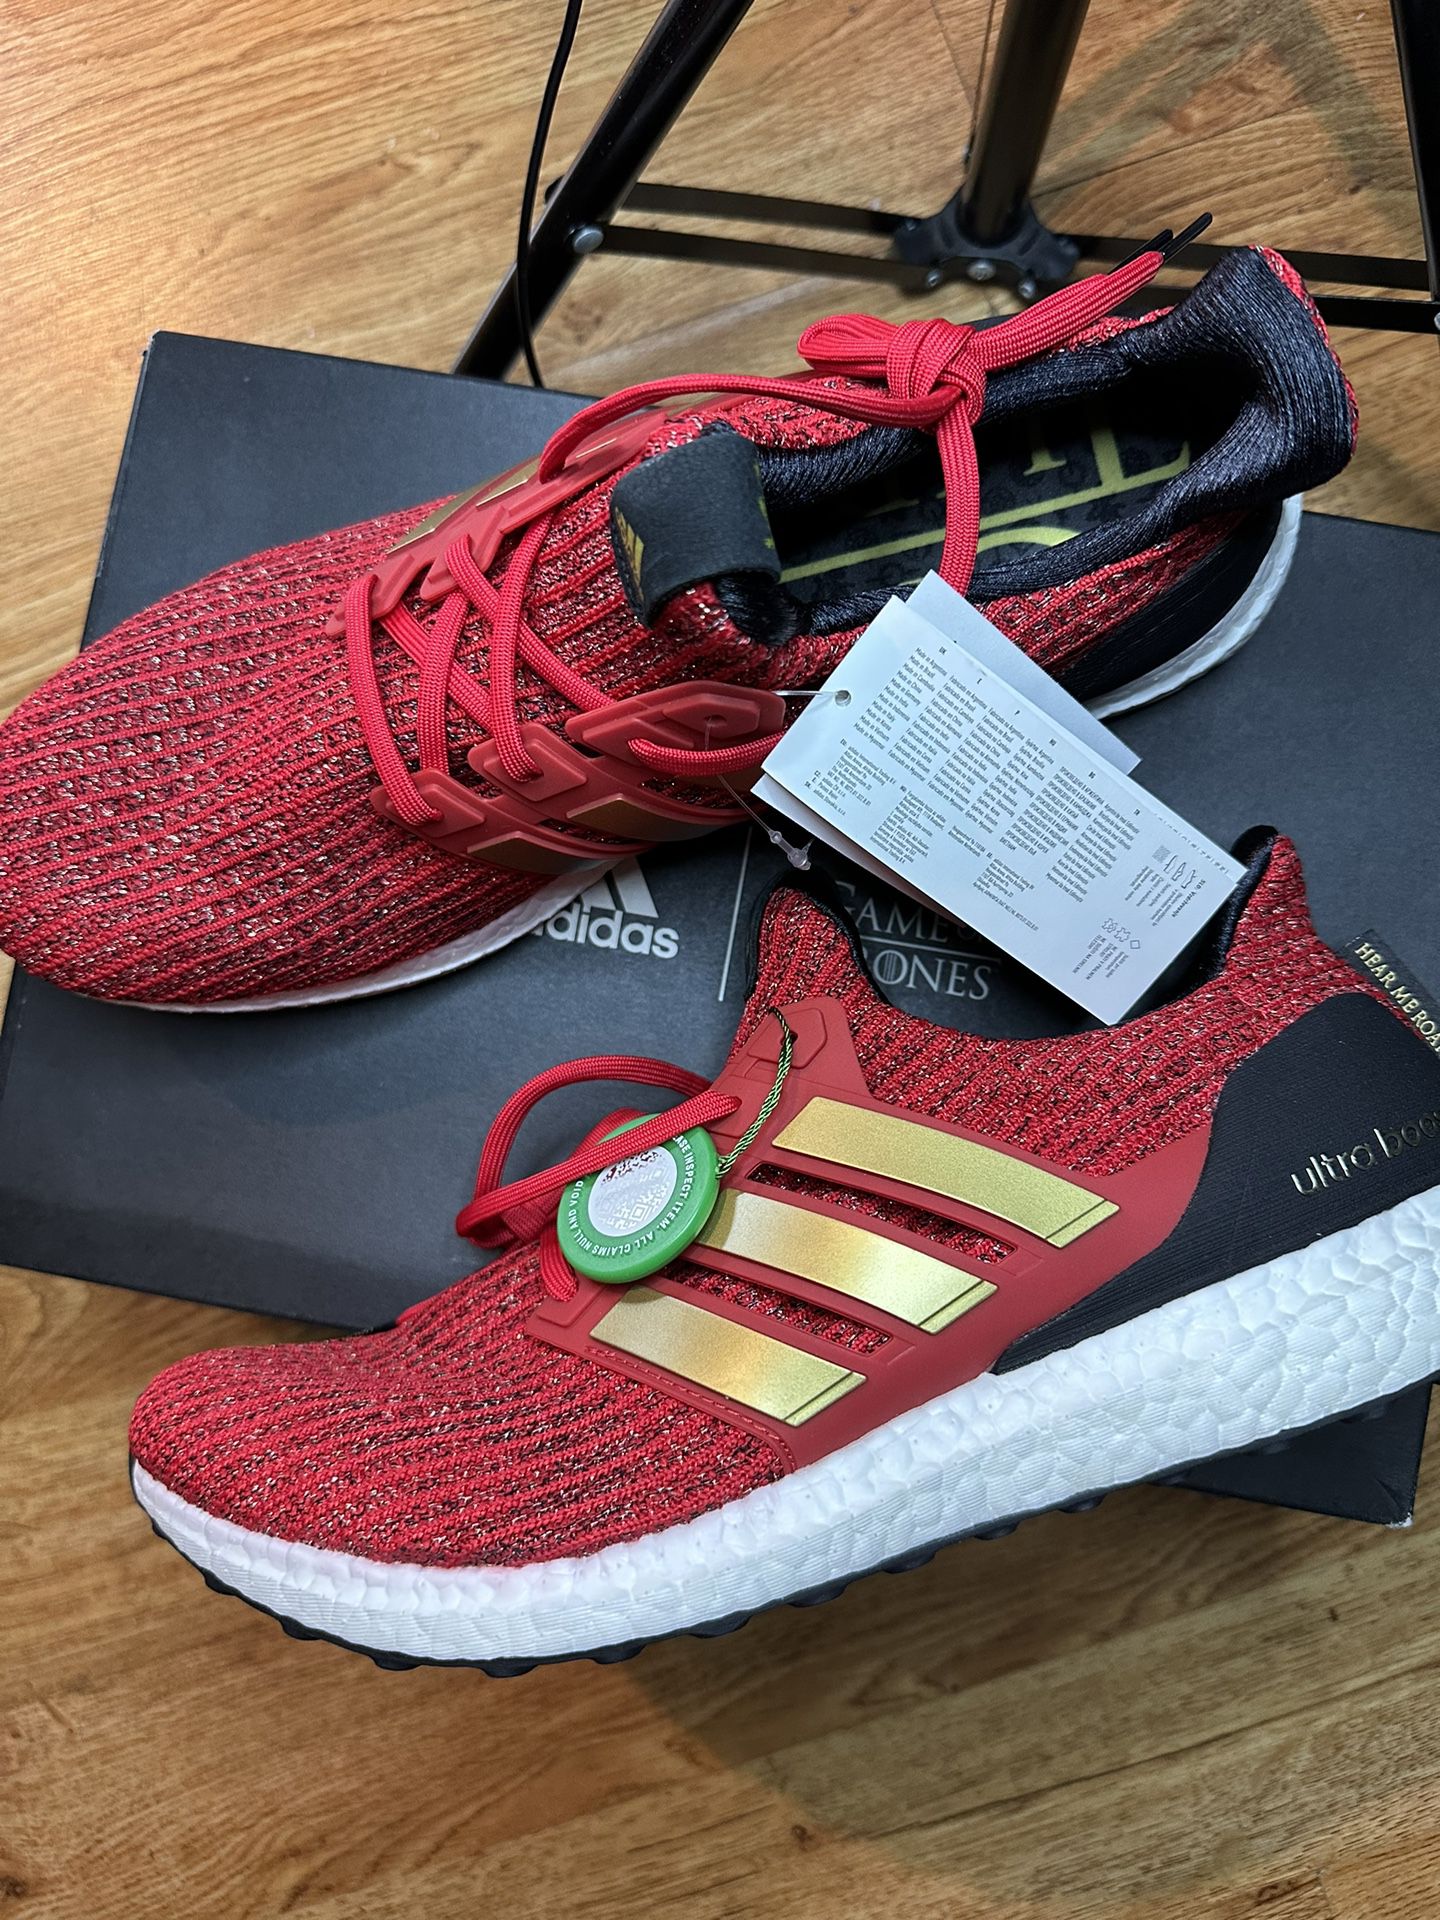 NEW Adidas ULTRA BOOST Game Of Thrones Size M 12 W 13.5 Lannister for Sale in Irwindale, CA - OfferUp